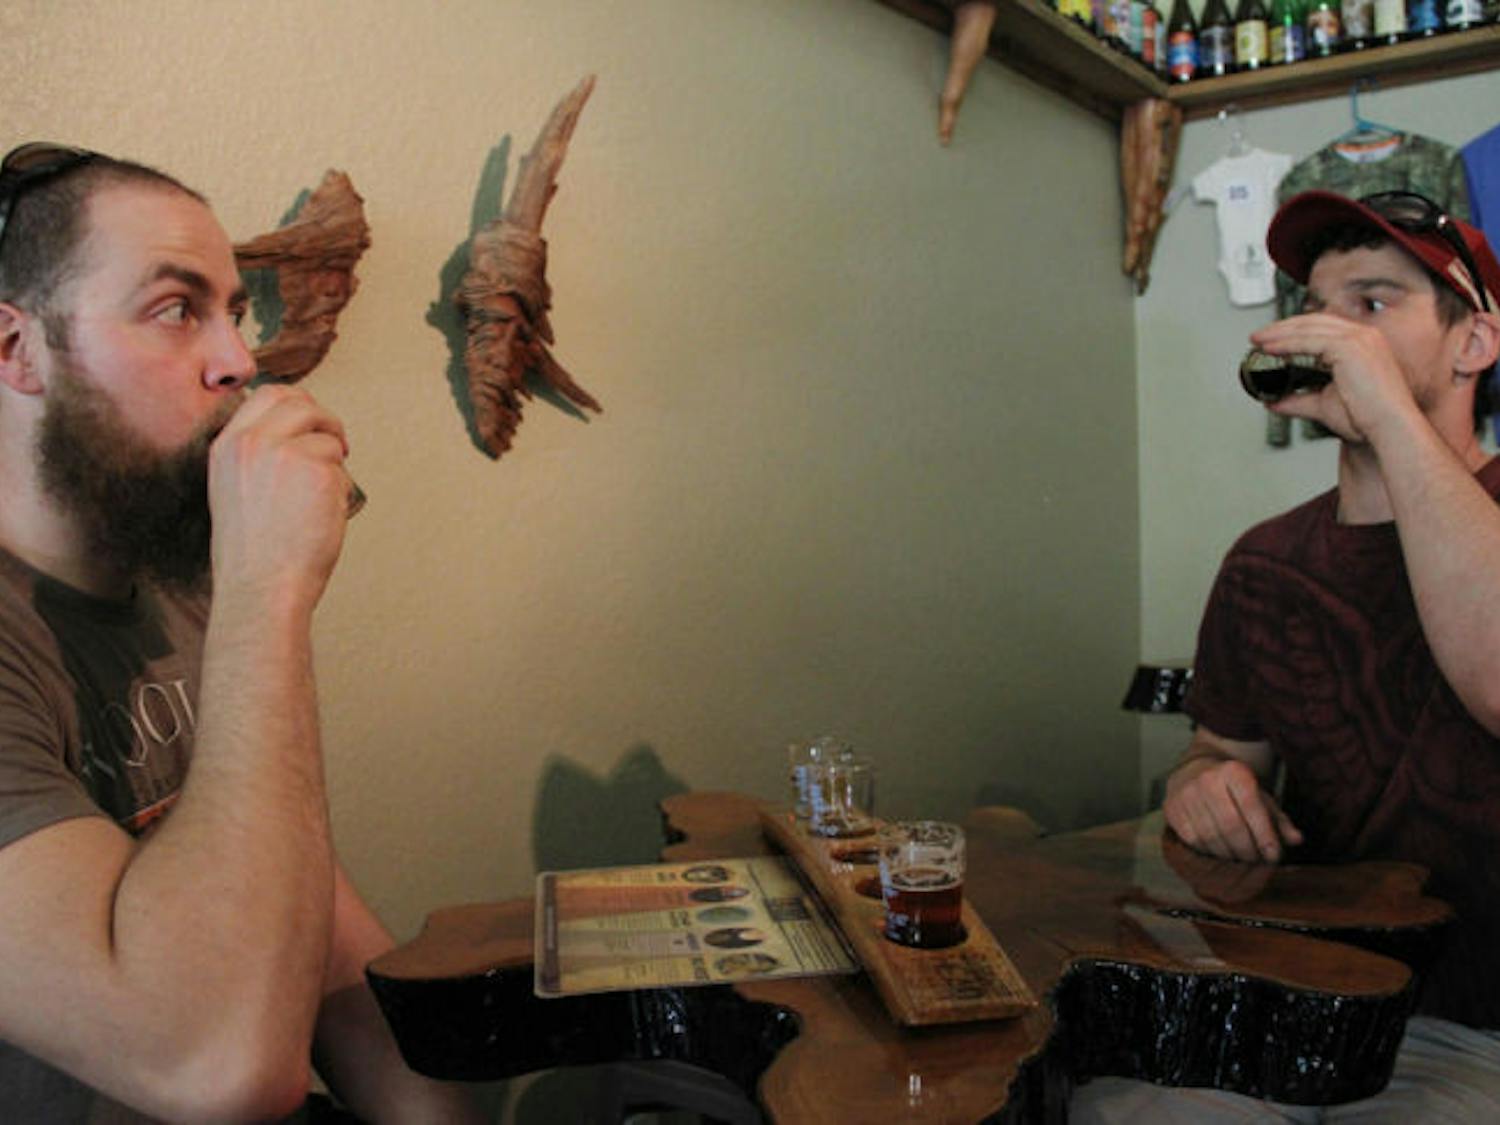 Sam Linhoff, 29, and Jake Lehn, 29, drink beer at Swamp Head Brewery on Monday afternoon.​ The brewery won a gold medal for its smoke beer, Smoke Signal, on Friday at the World Beer Cup.